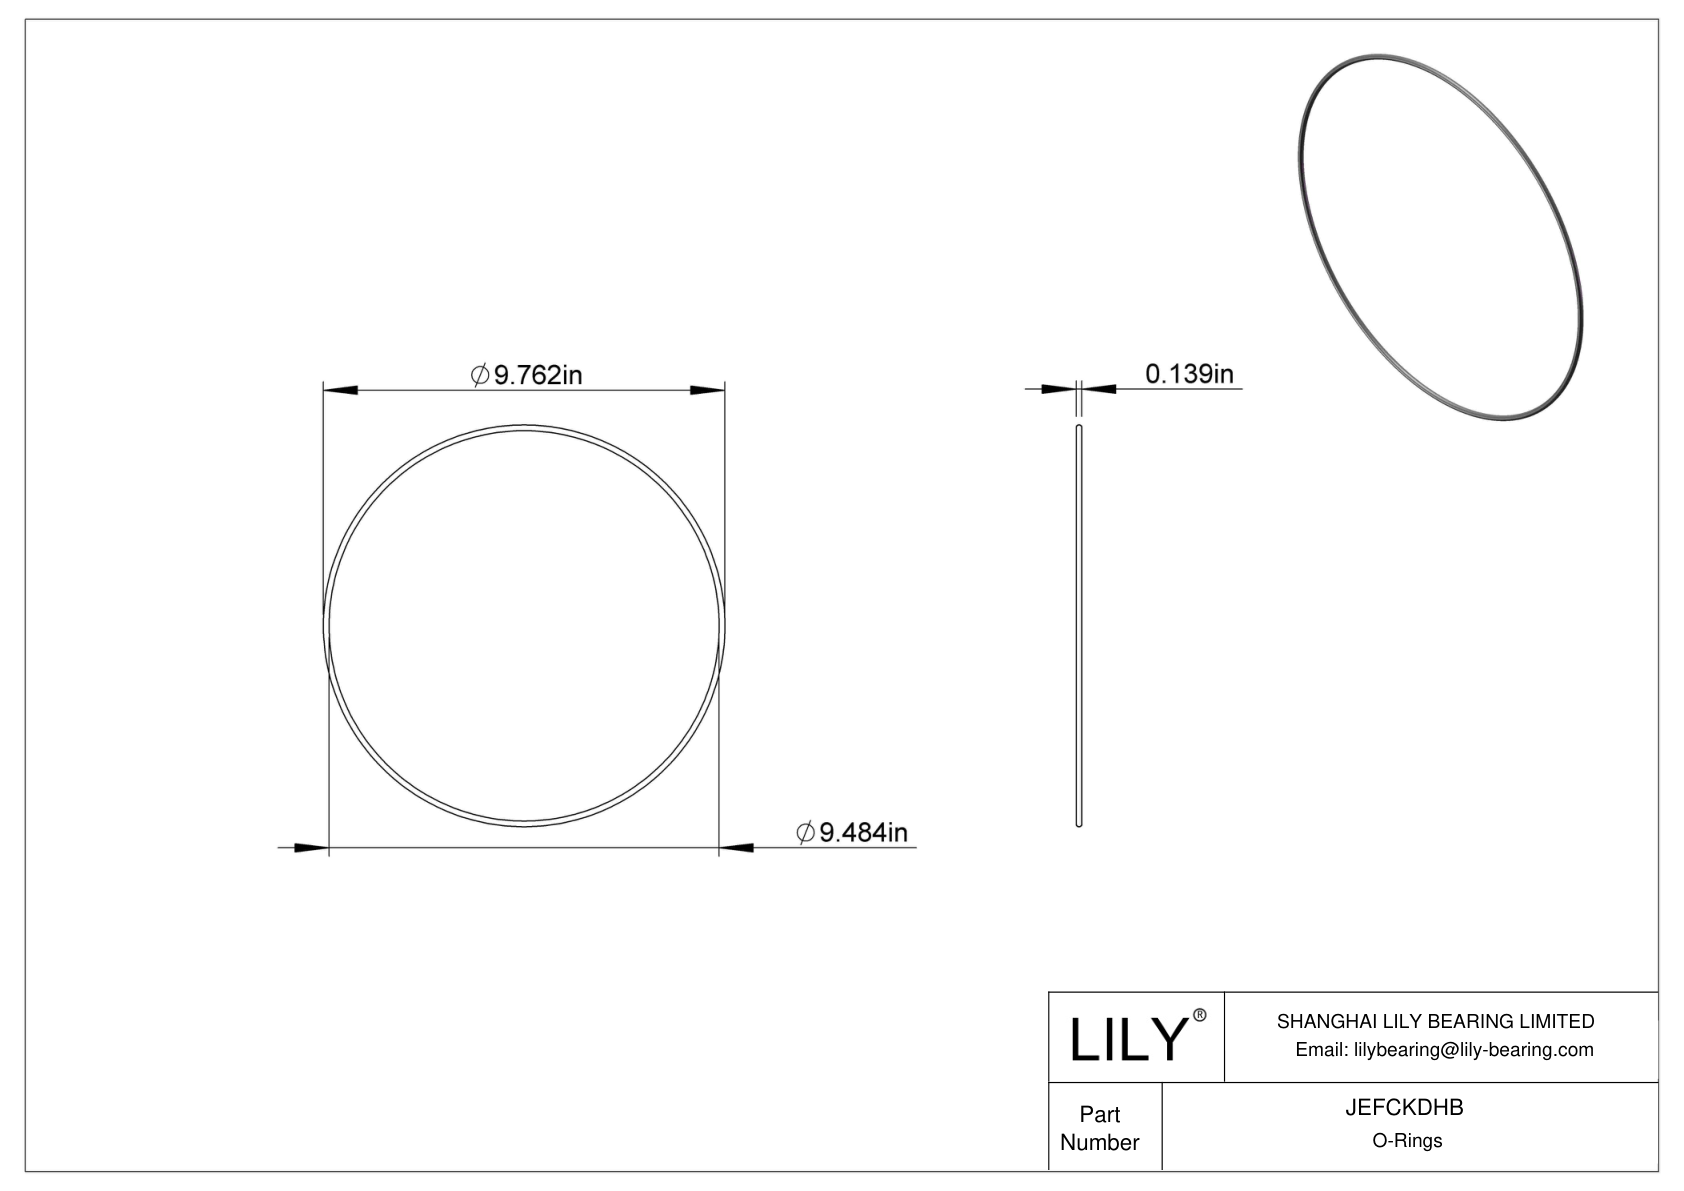 JEFCKDHB Oil Resistant O-Rings Round cad drawing